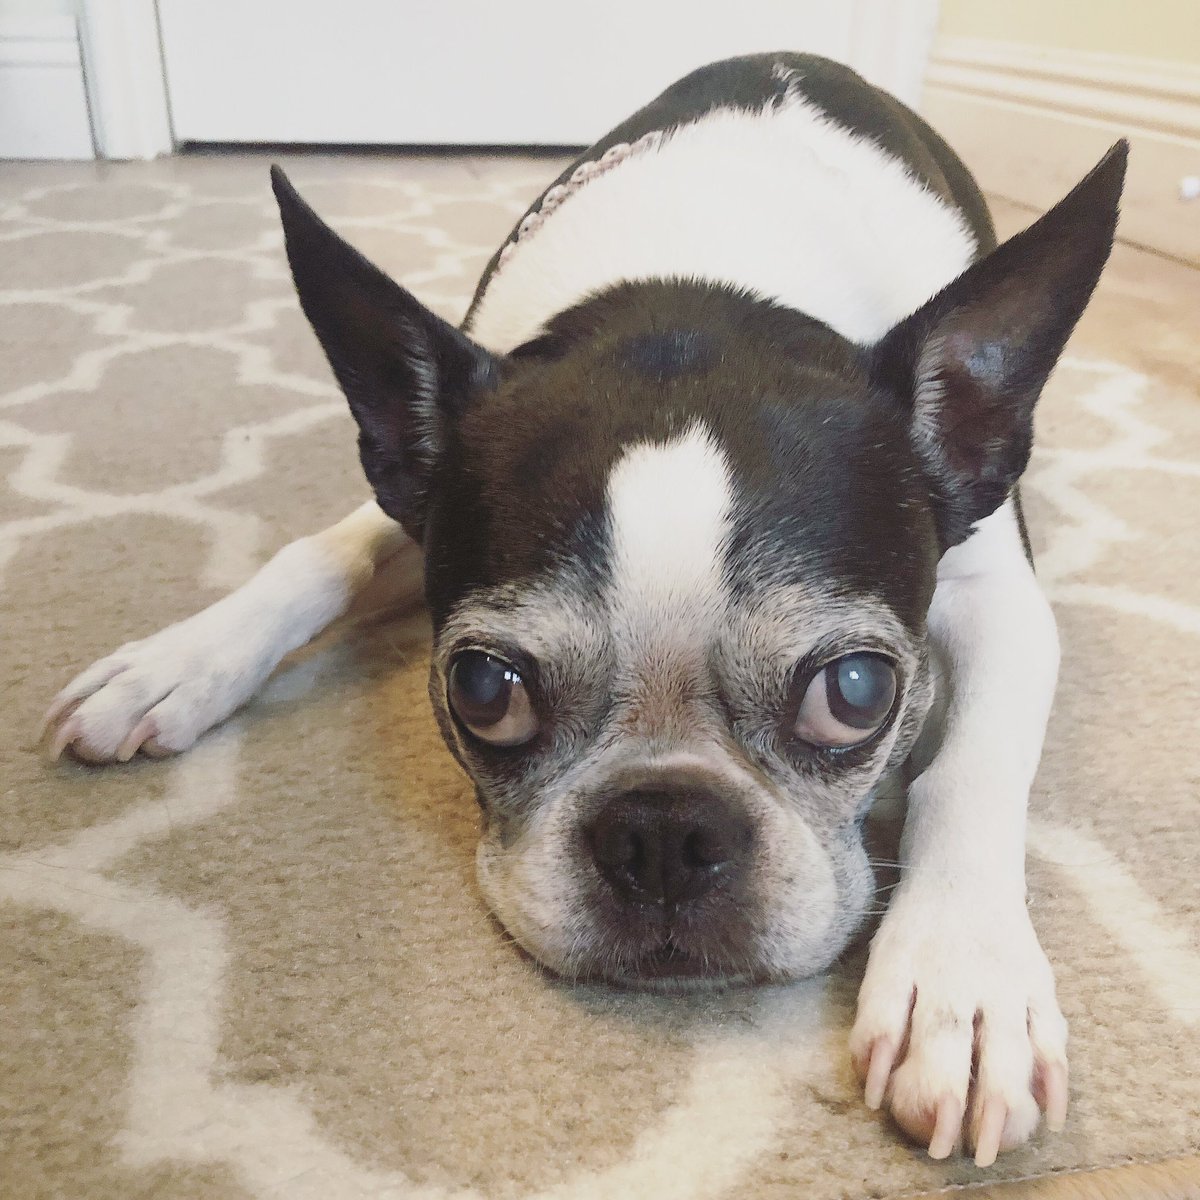 This is the Mondayest Monday that ever Mondayed 😳 #bostonterriernation #bostonterrier #bostonterriersrule #bostonterrierlife #bostonterrierpics #bostonterriers #bostonterrierlove #dogsofinsta #bostonterriersforever #doglife #dogsofinstagram #squishyfacecrew #mondaymood #dogmodel